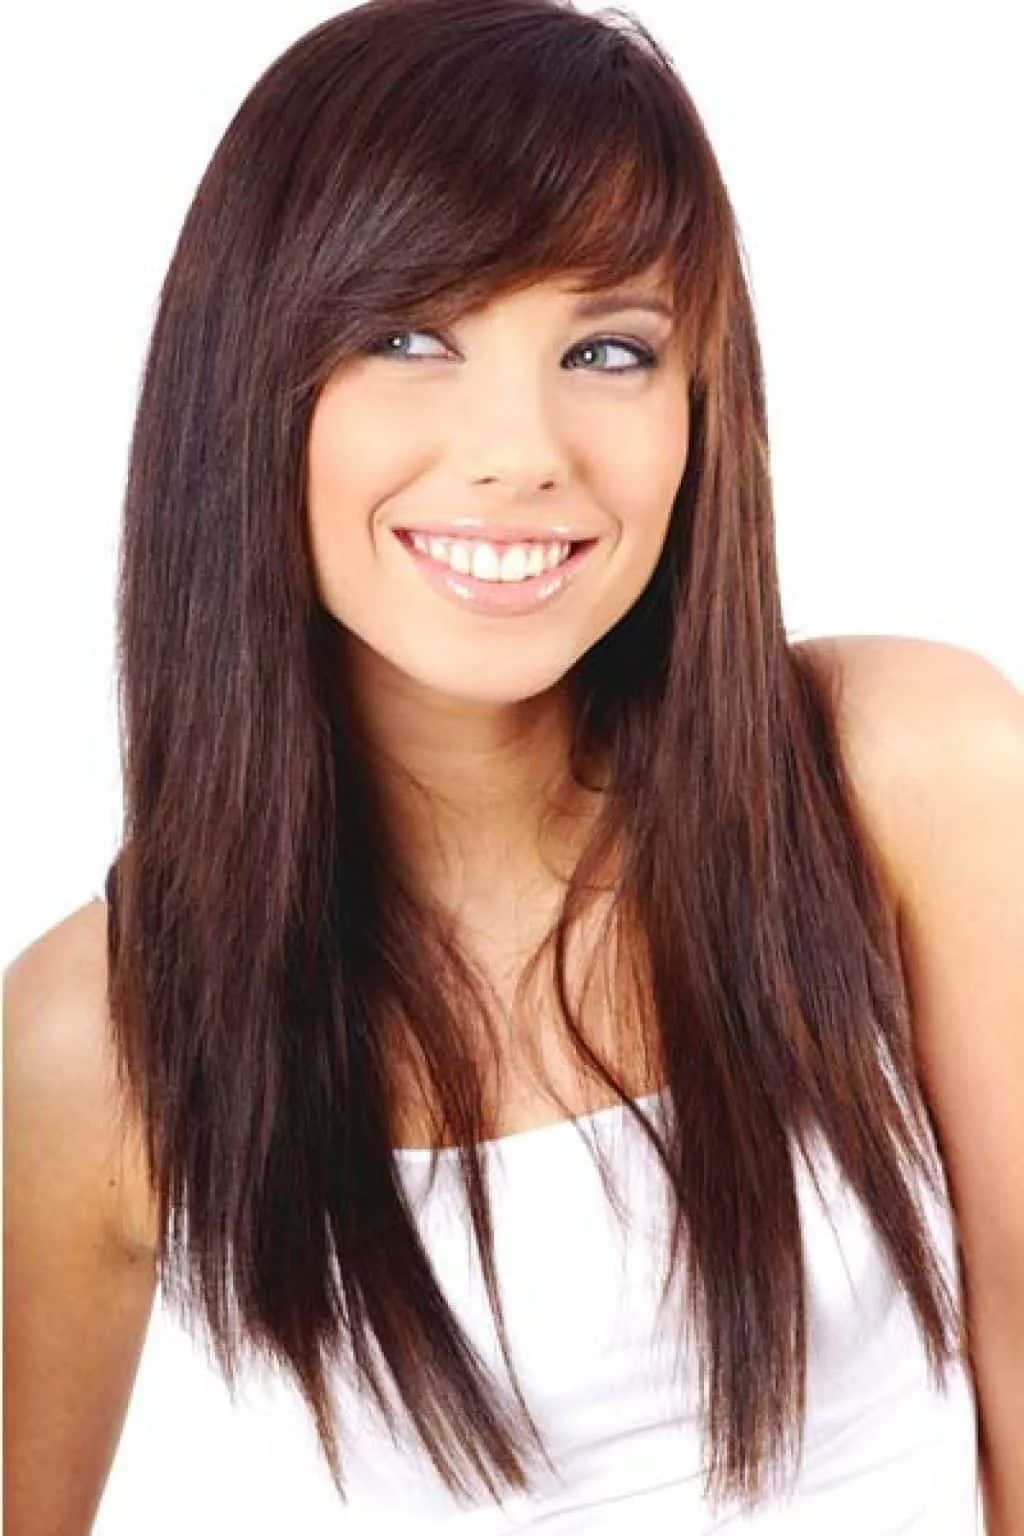 30 Most Amazing Ways to Style Side Bangs With Long Hair